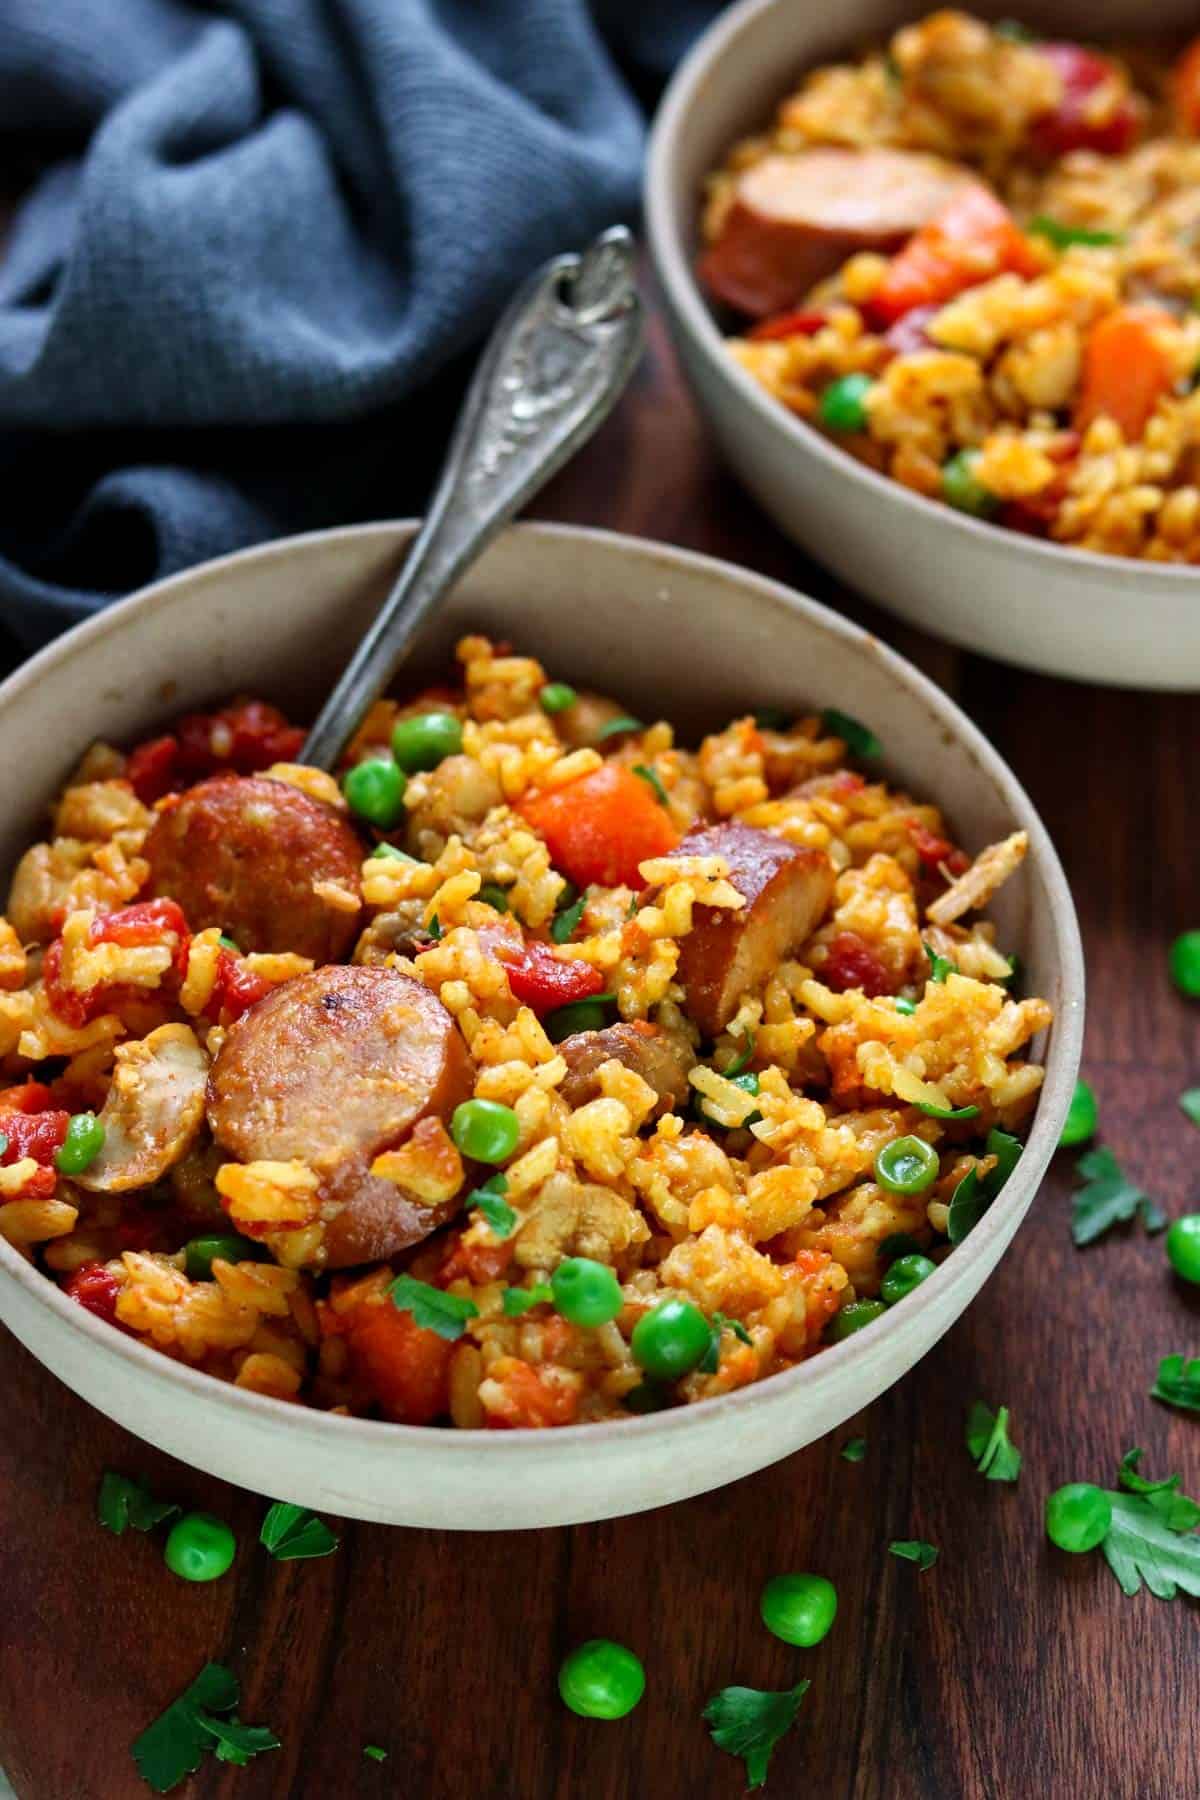 You are going to love this recipe for Instant Pot Cajun Rice with Chicken and Sausage. It is deliciously full of rice, has the sweet flavors of carrots and tomatoes, the fresh snap of green peas, and the wonderful spices of cajun seasoning. The andouille sausage adds a layer of heat and the chicken comes out tender and flavorful. It is perfection in one bowl!